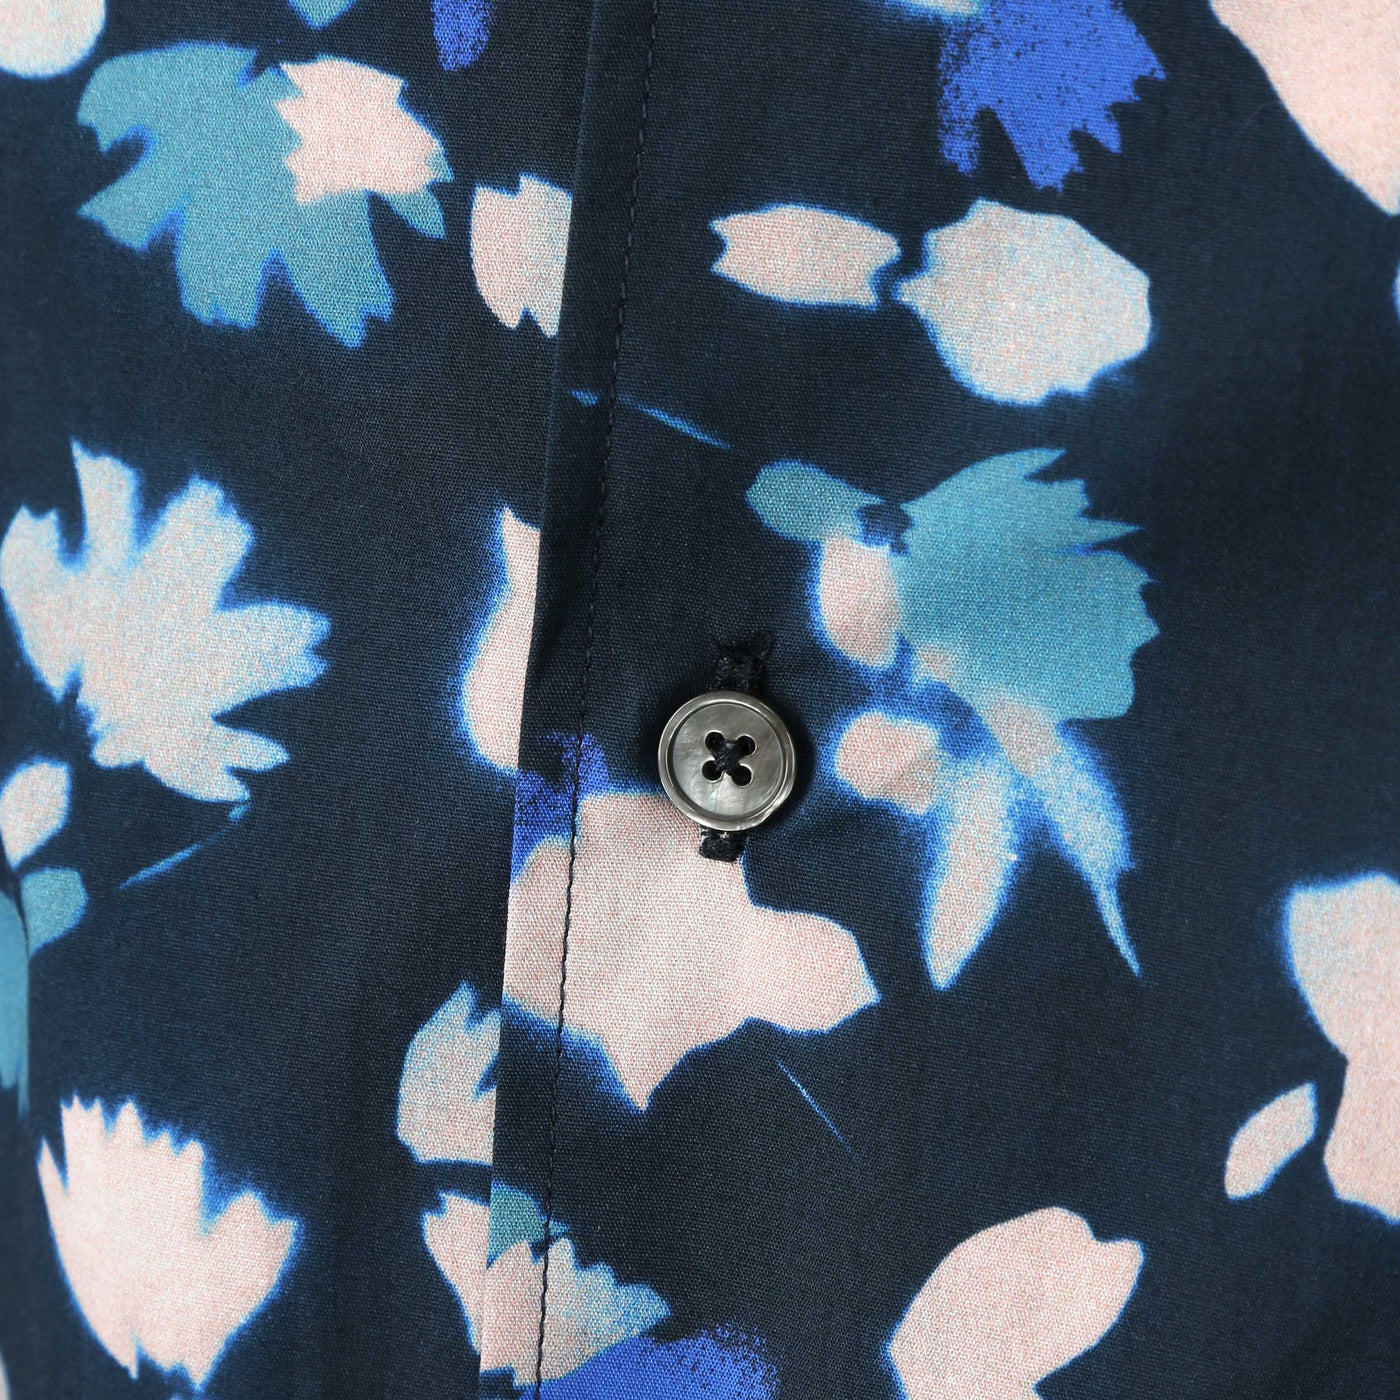 Paul Smith Slim Fit Floral SS Shirt in Navy Print